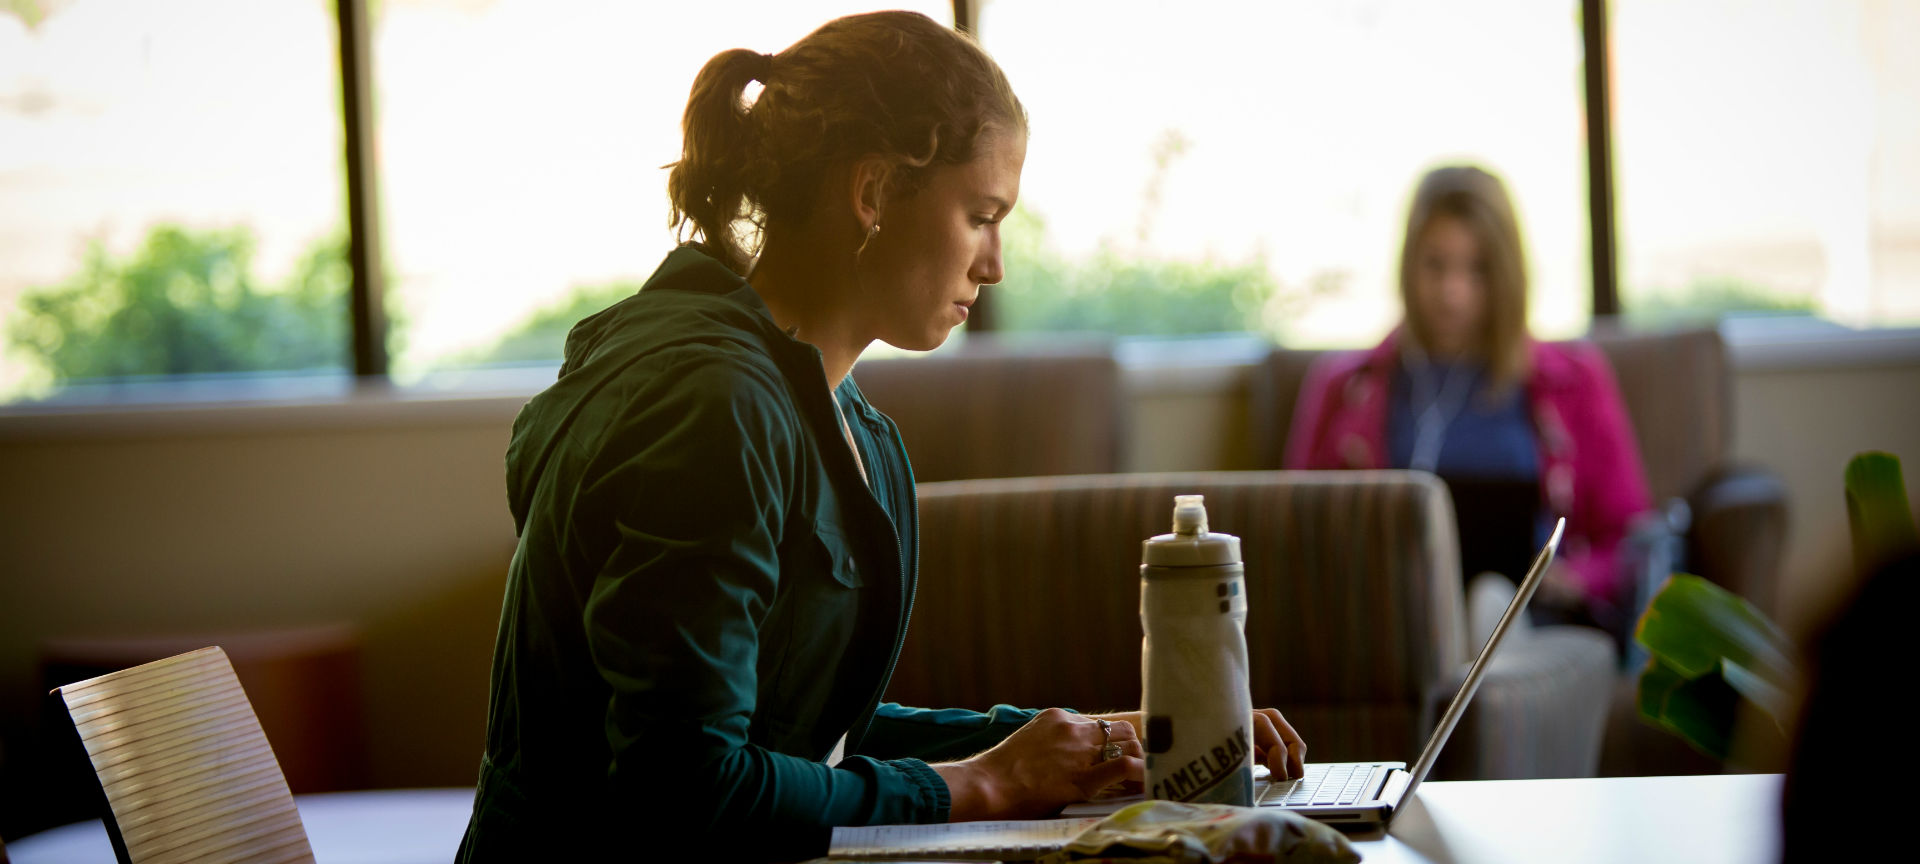 A student studying at a table with a water bottle and laptop as another student sits in the background in front of a window.